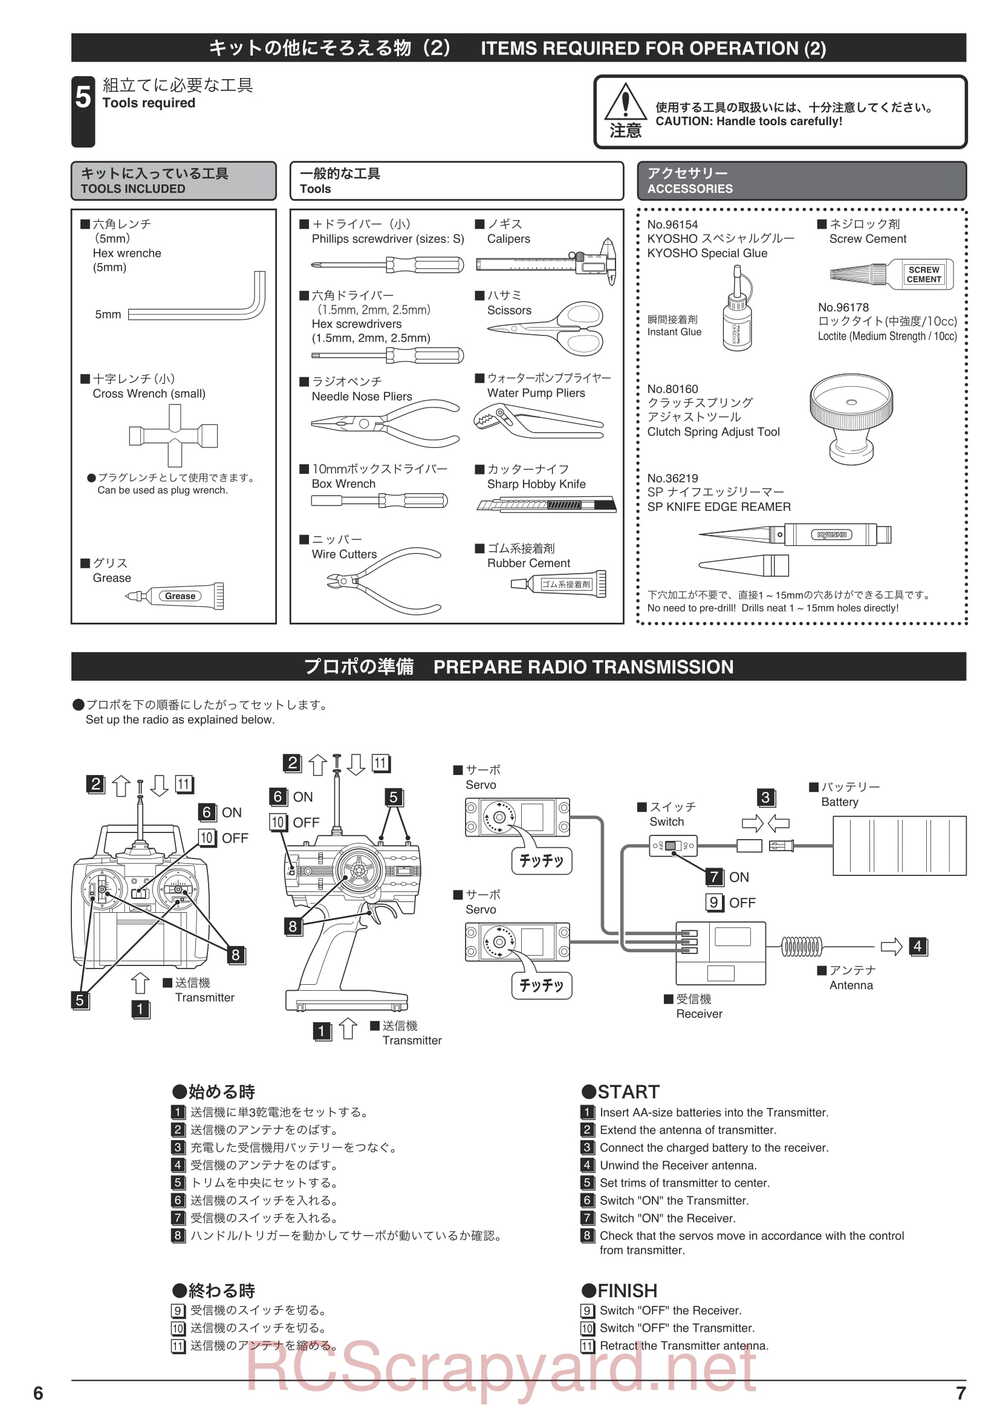 Kyosho - 31265 - V-ONE-R4 - Manual - Page 07